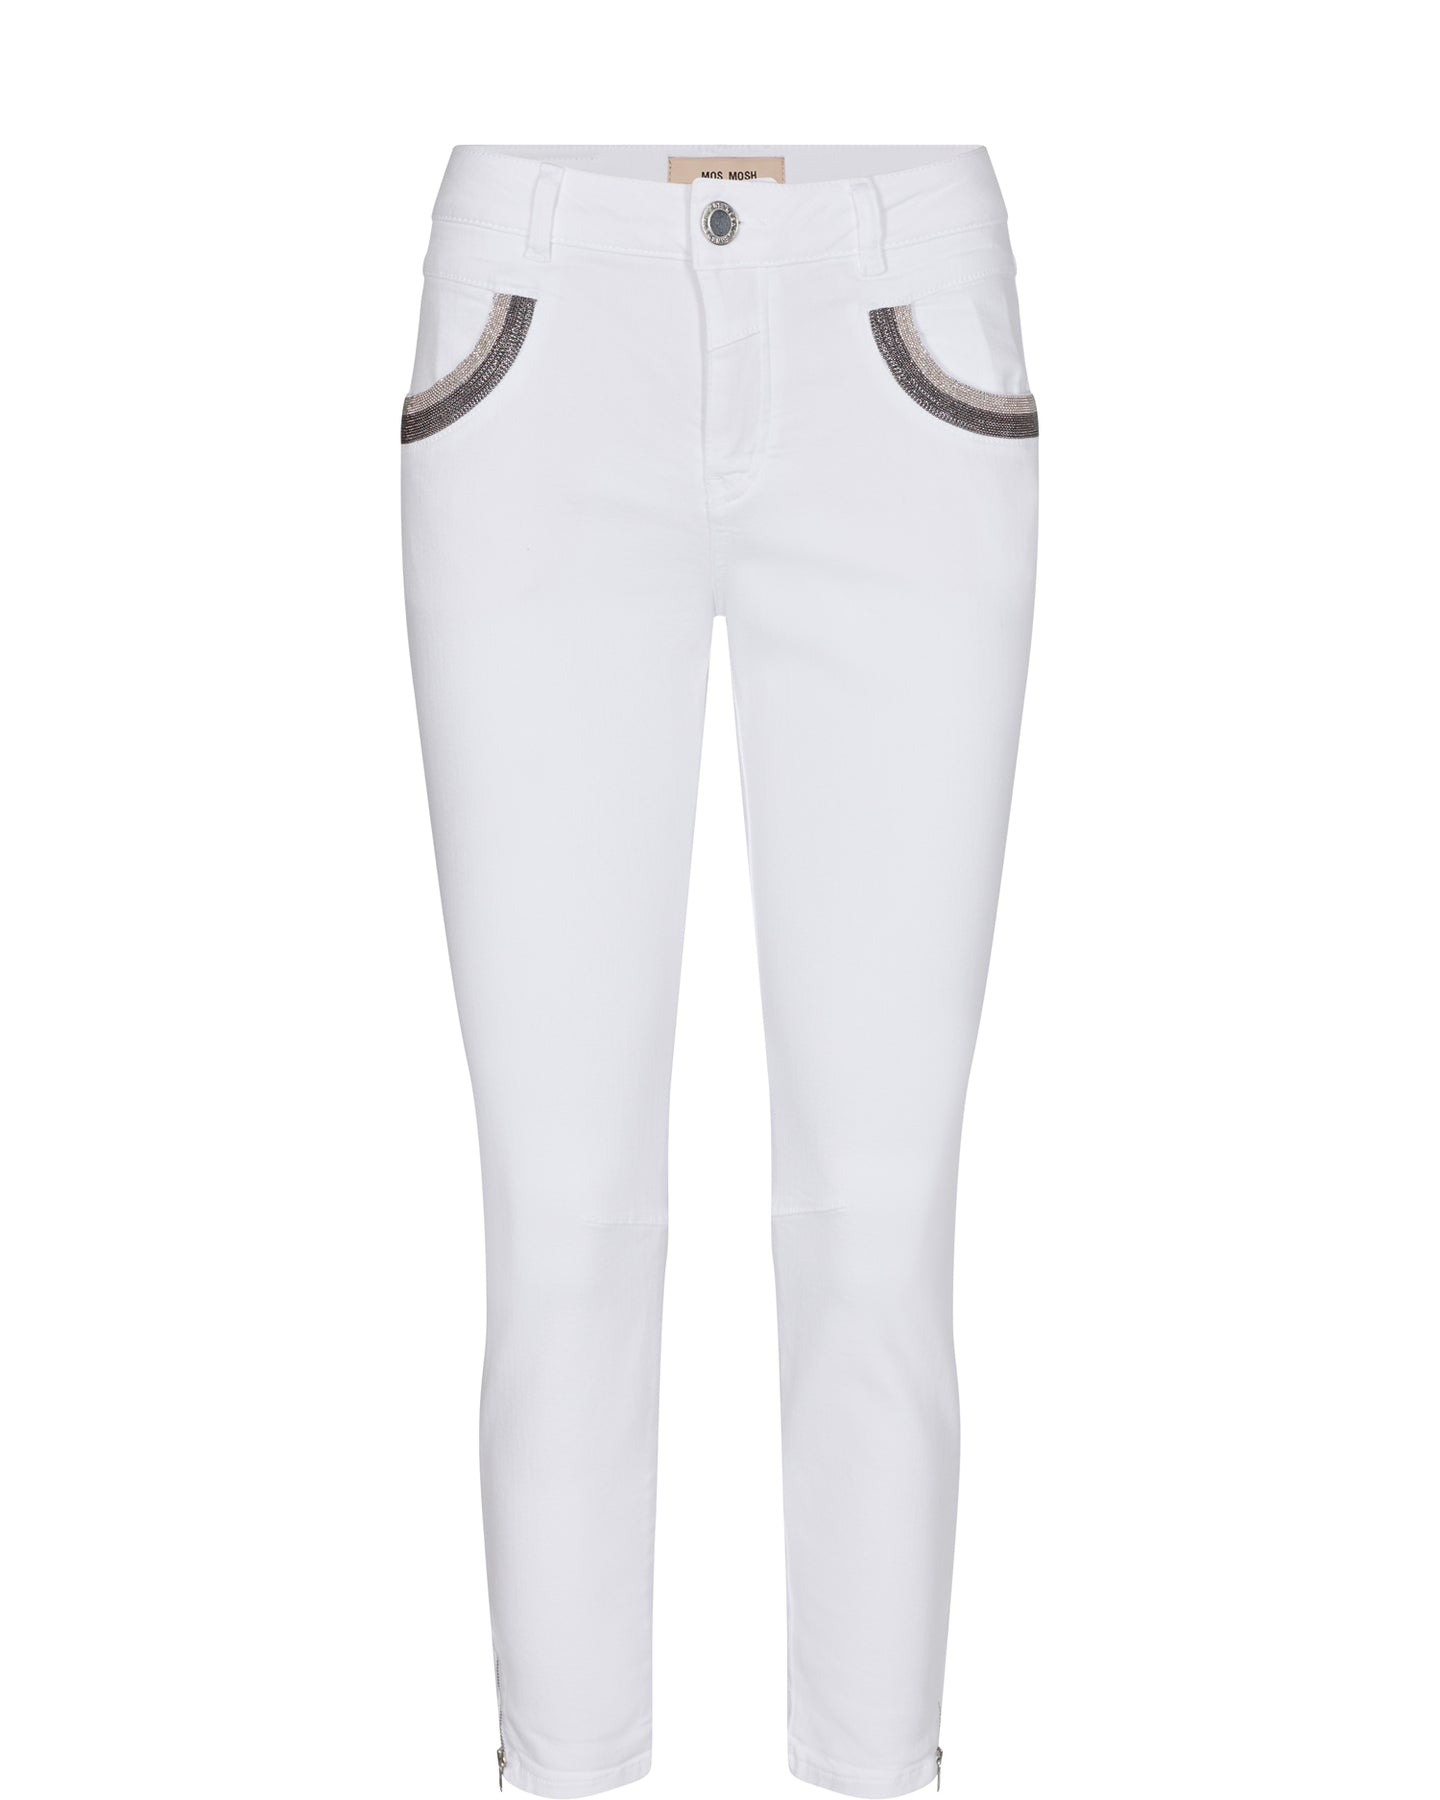 Naomi Shade White Jeans - Last pair - Size 9